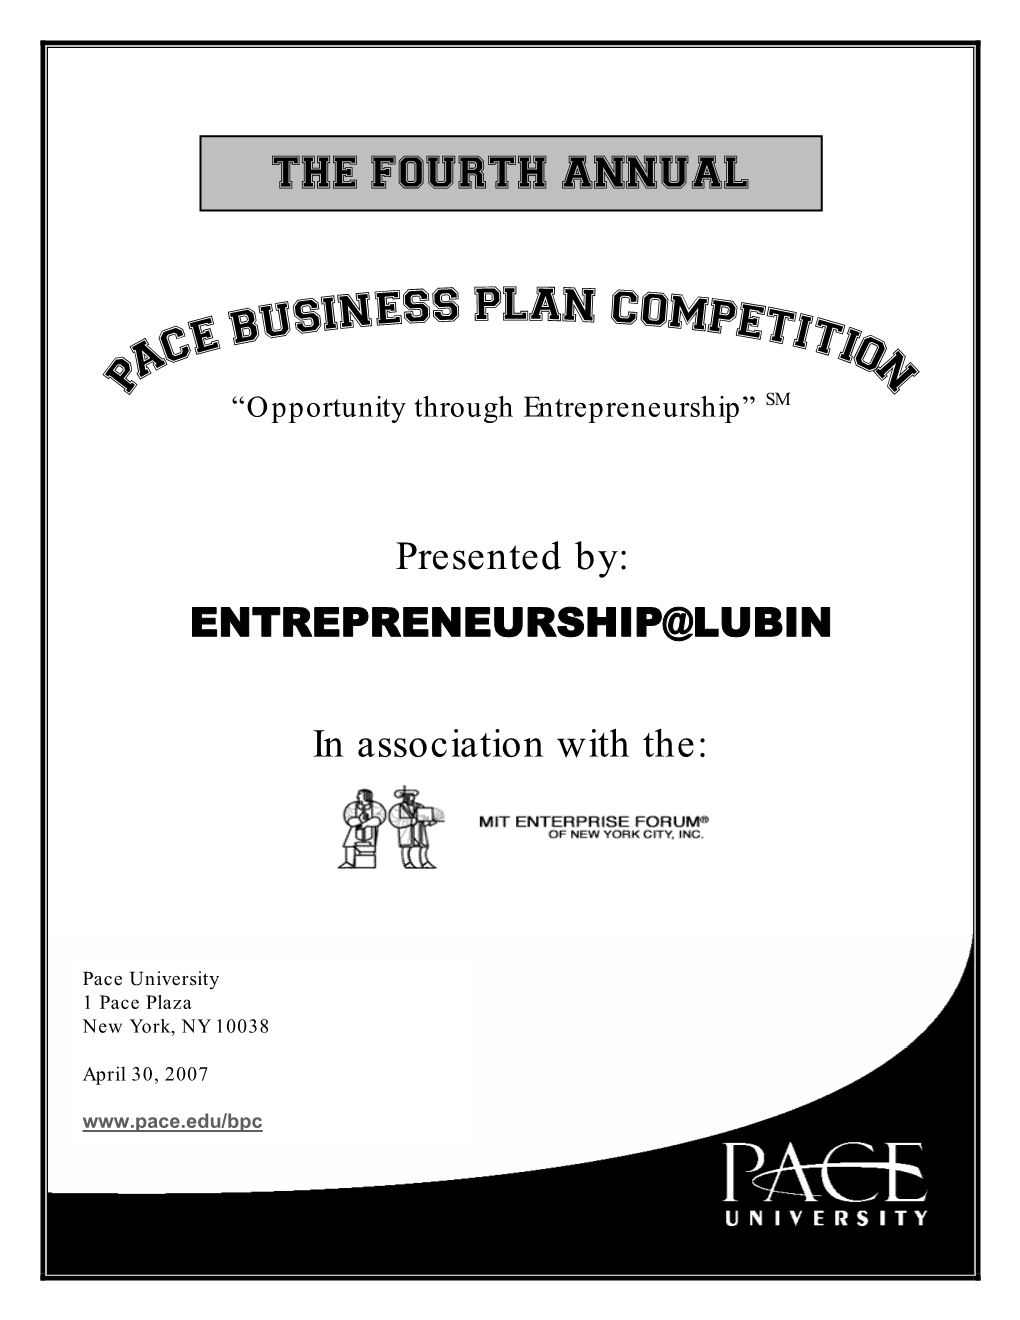 Program for the Fourth Annual Pace Business Plan Competition